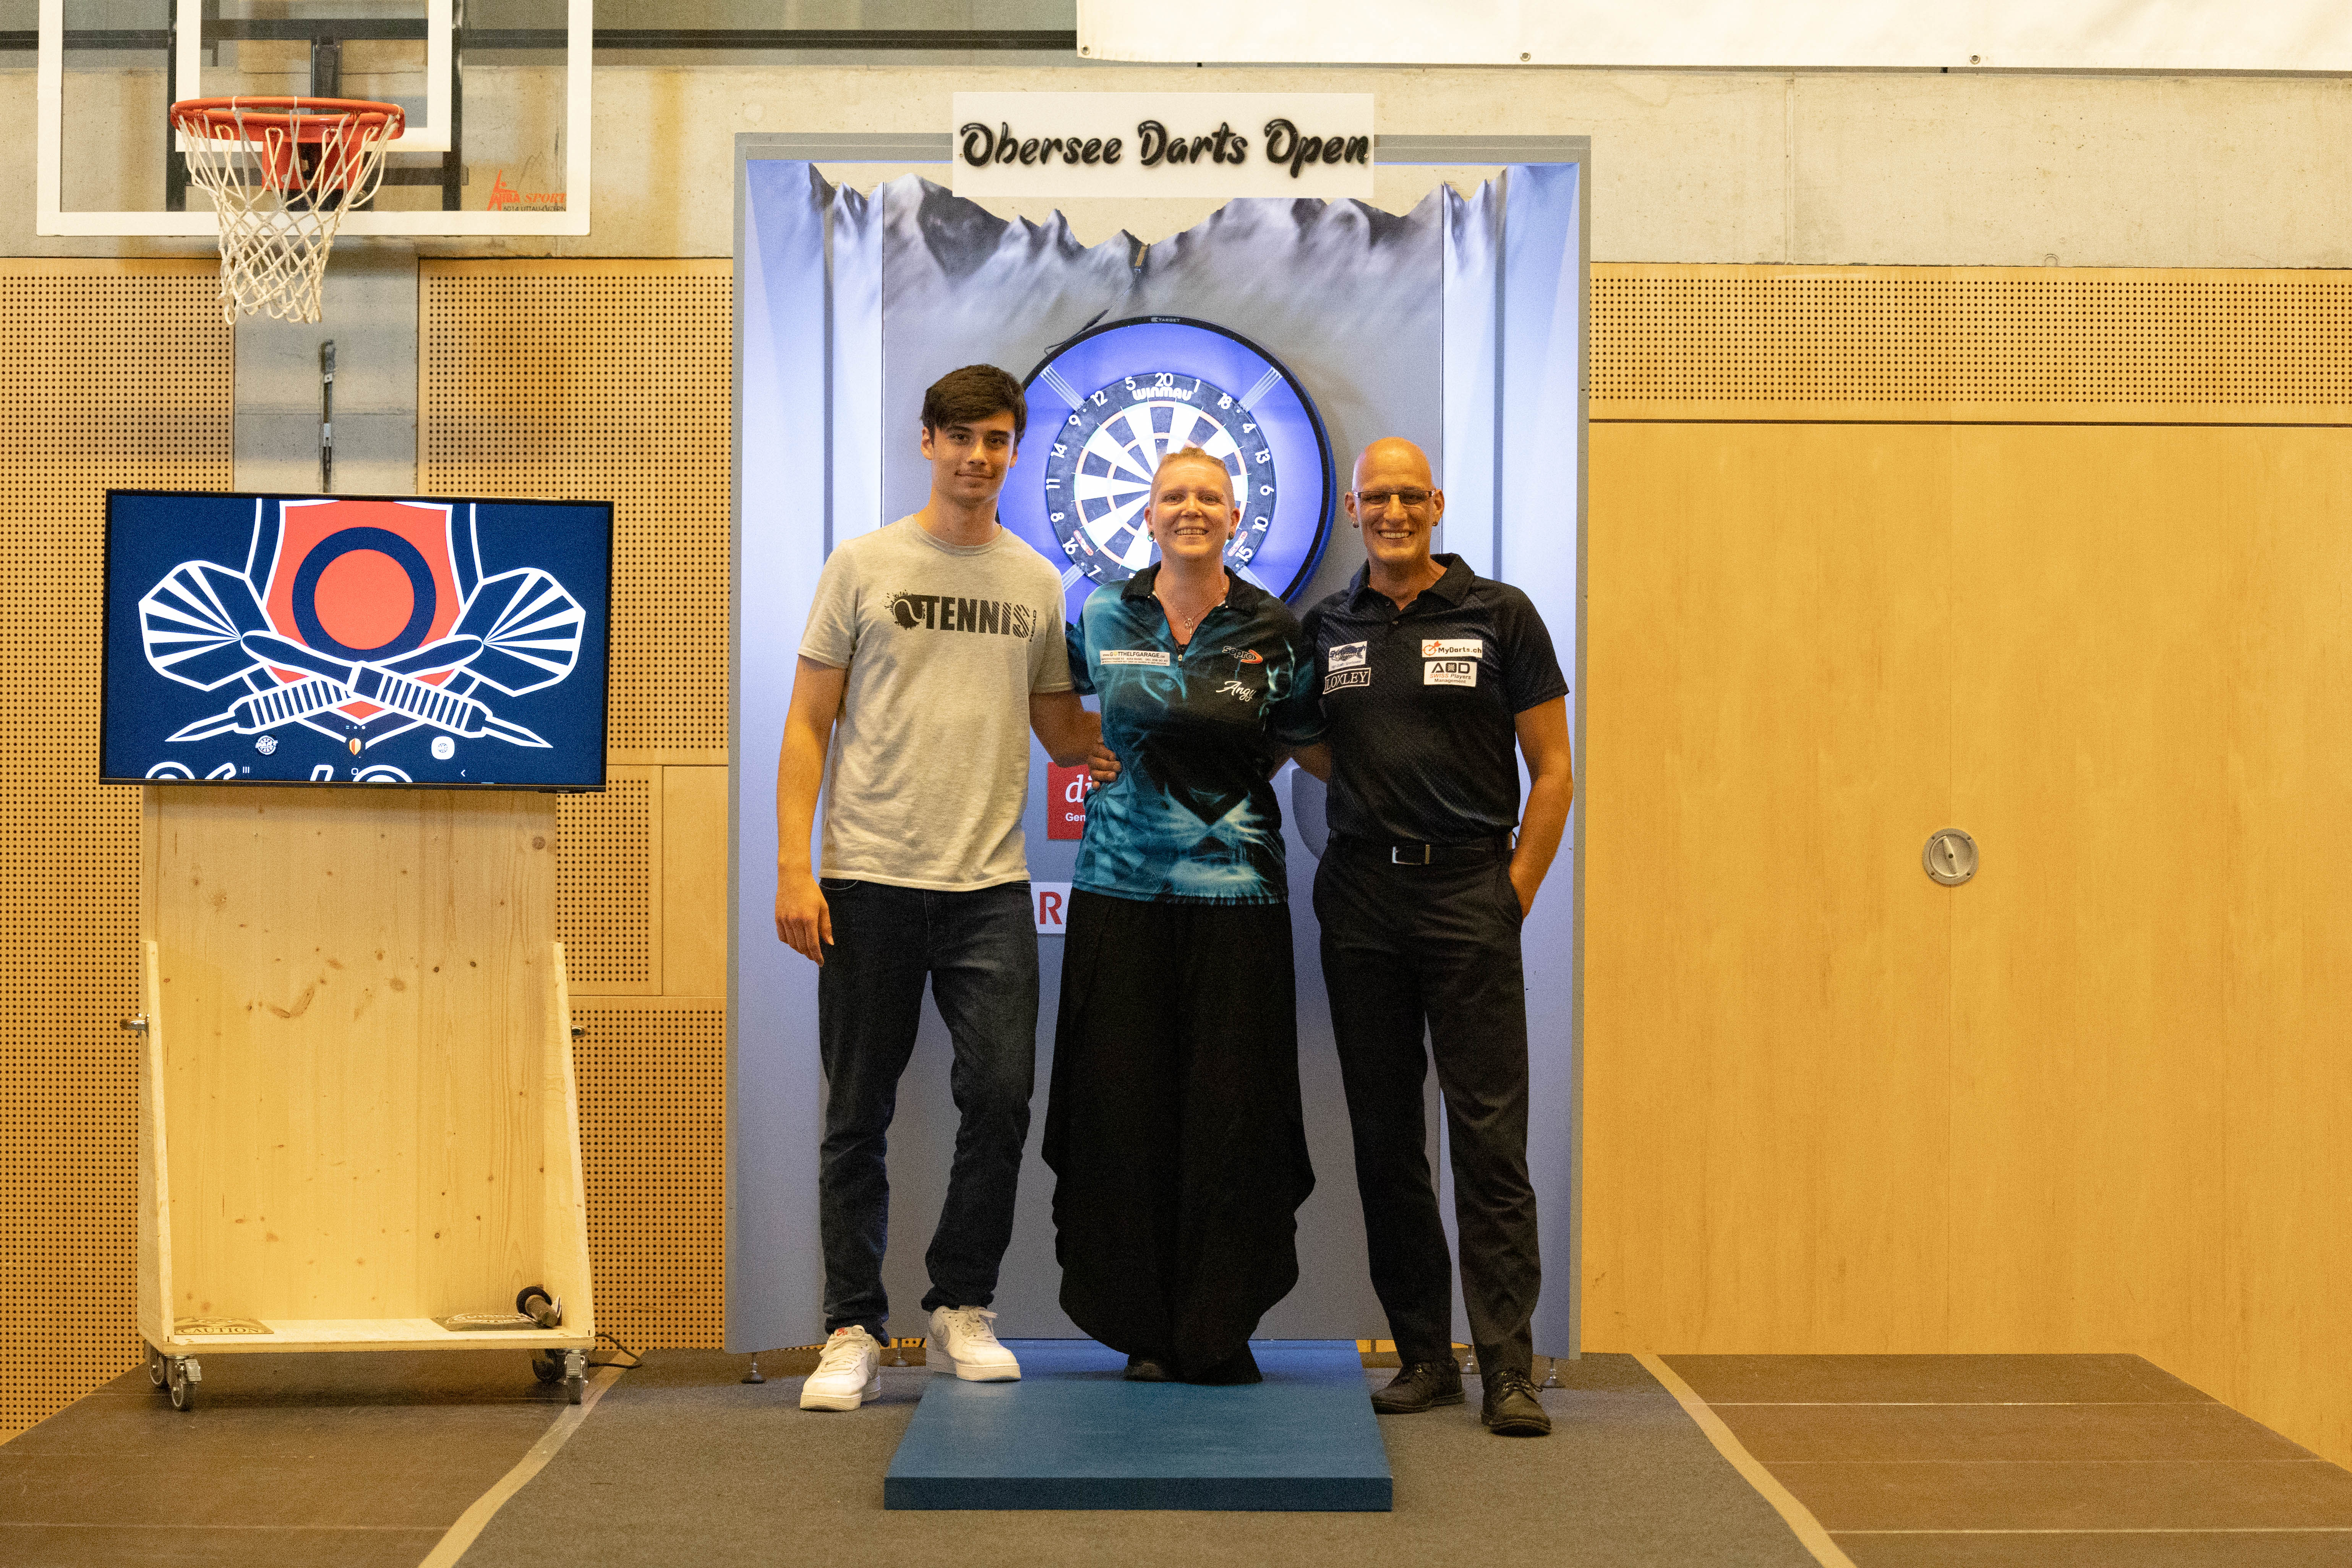 March Open et Obersee Darts Open